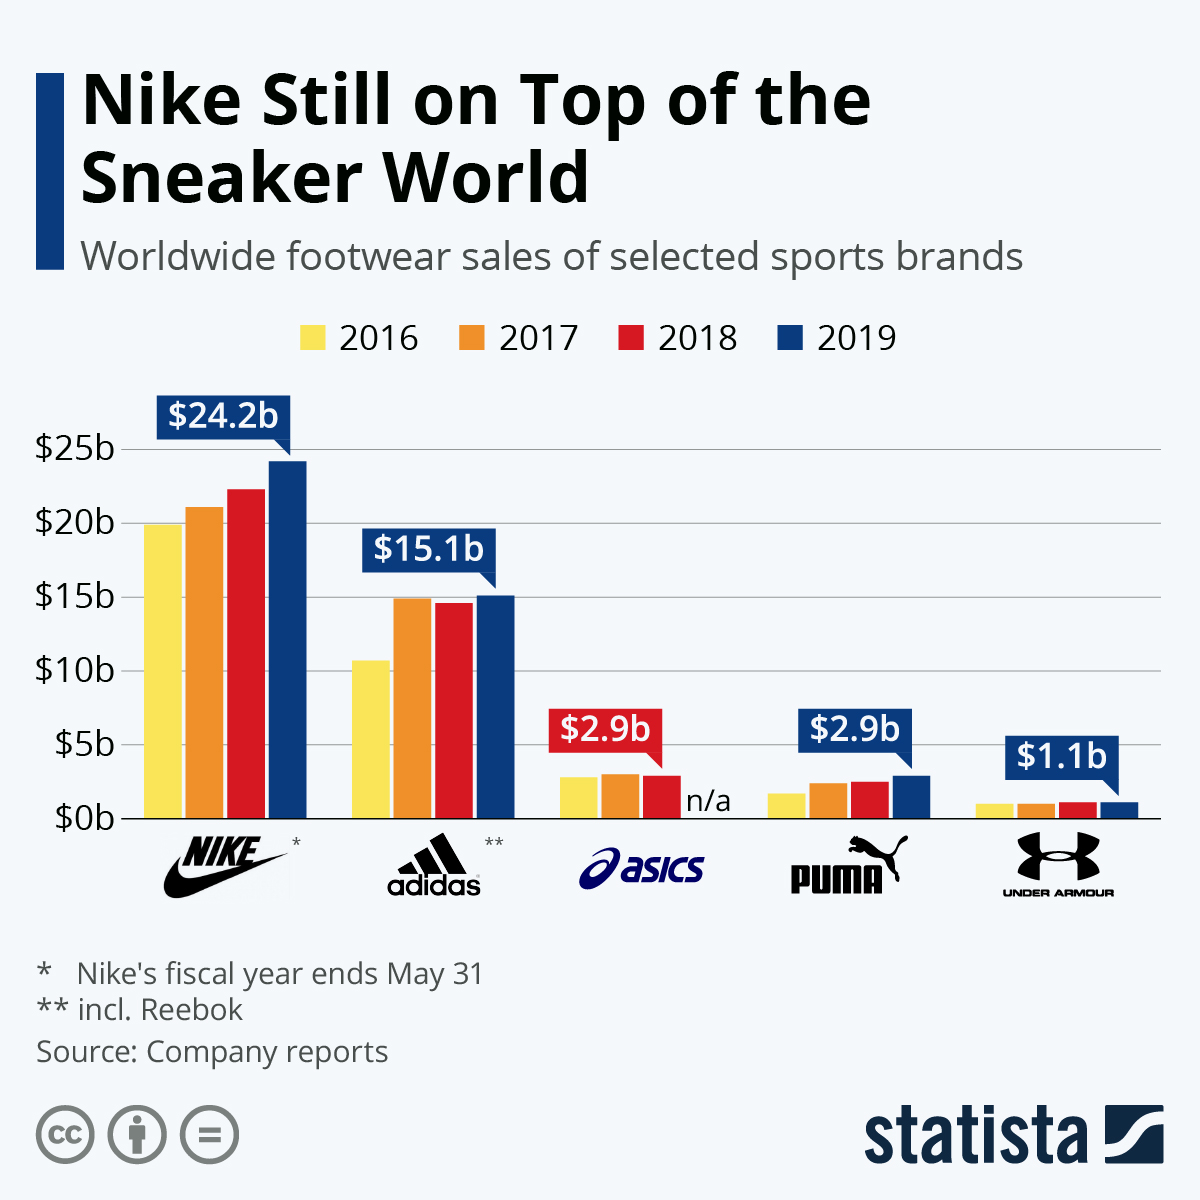 Twitter 上的Statista："#Nike is living large as the top #sneaker producer in the earning over $24bn in 2019. A lot of their is tied to #MichaelJordan, whose on the